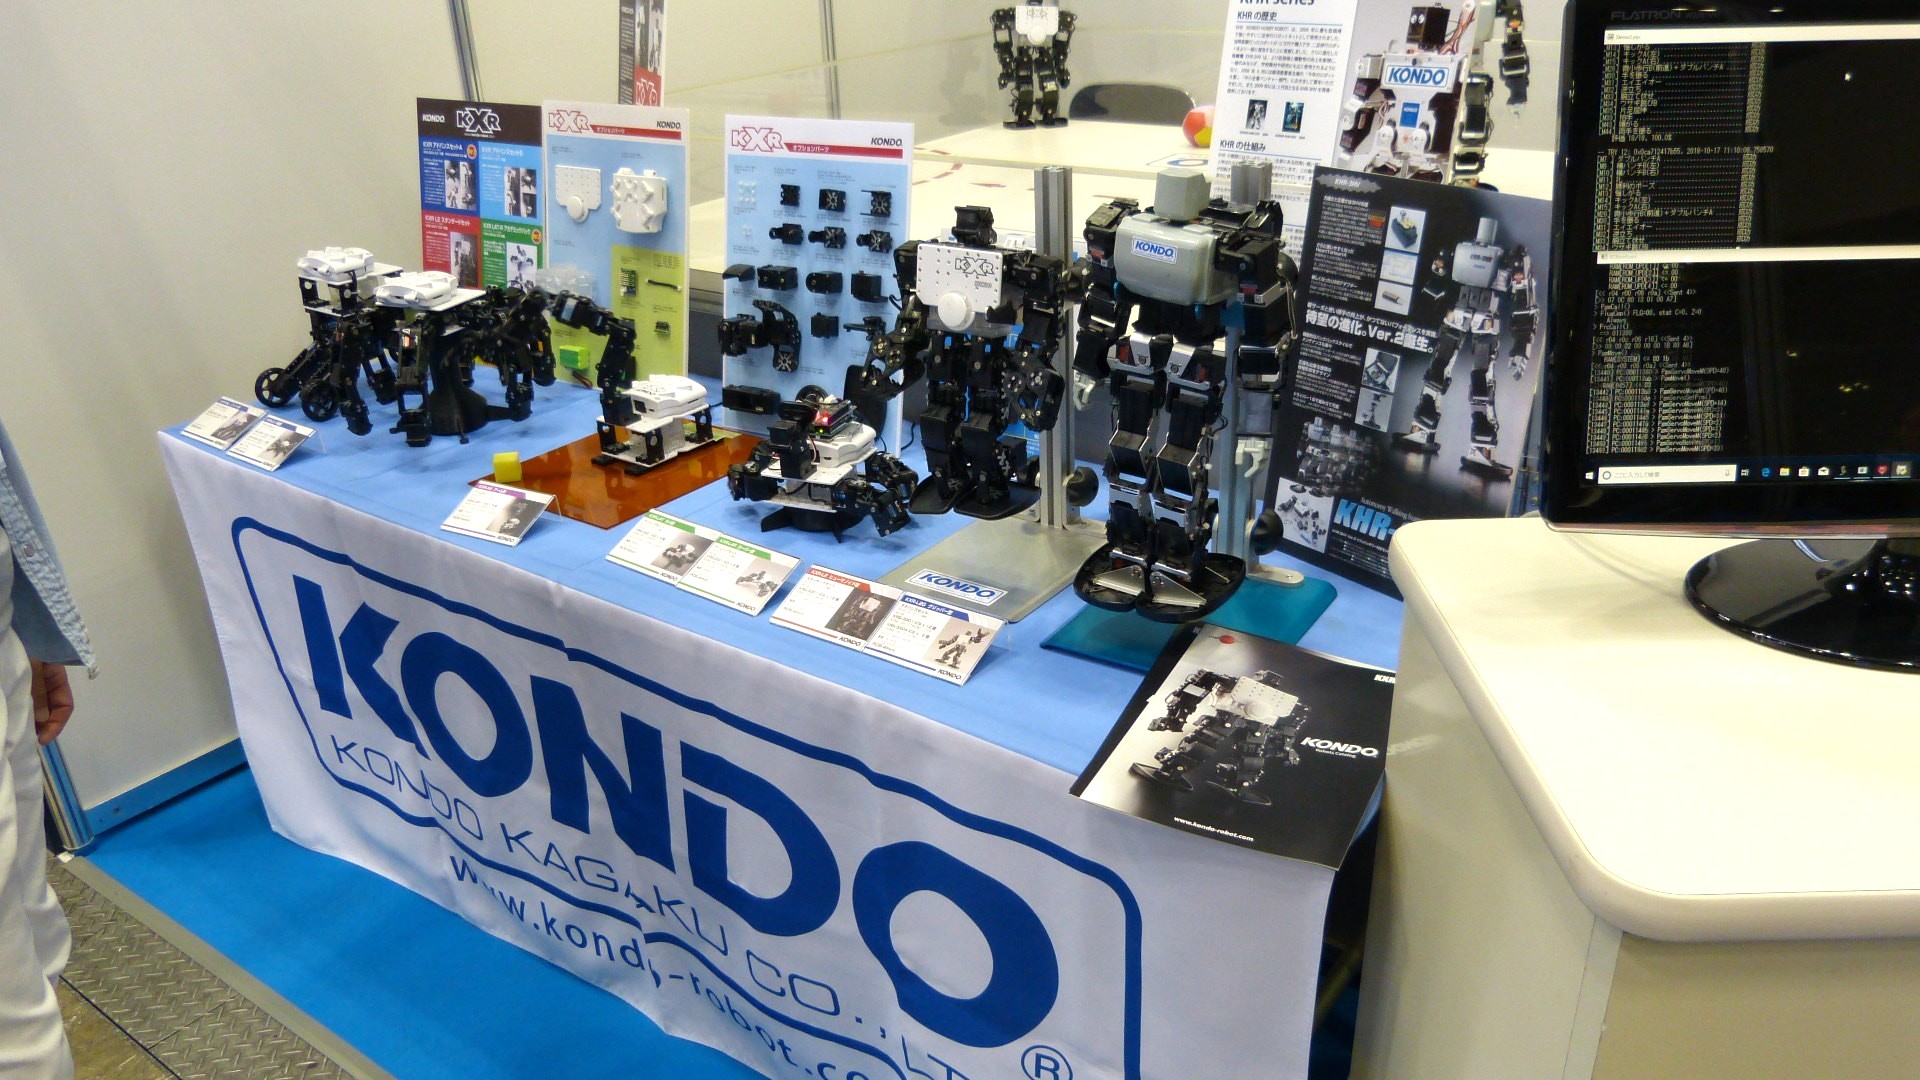 a counter with a Kondo logo banner displaying small robot parts such as arms and legs